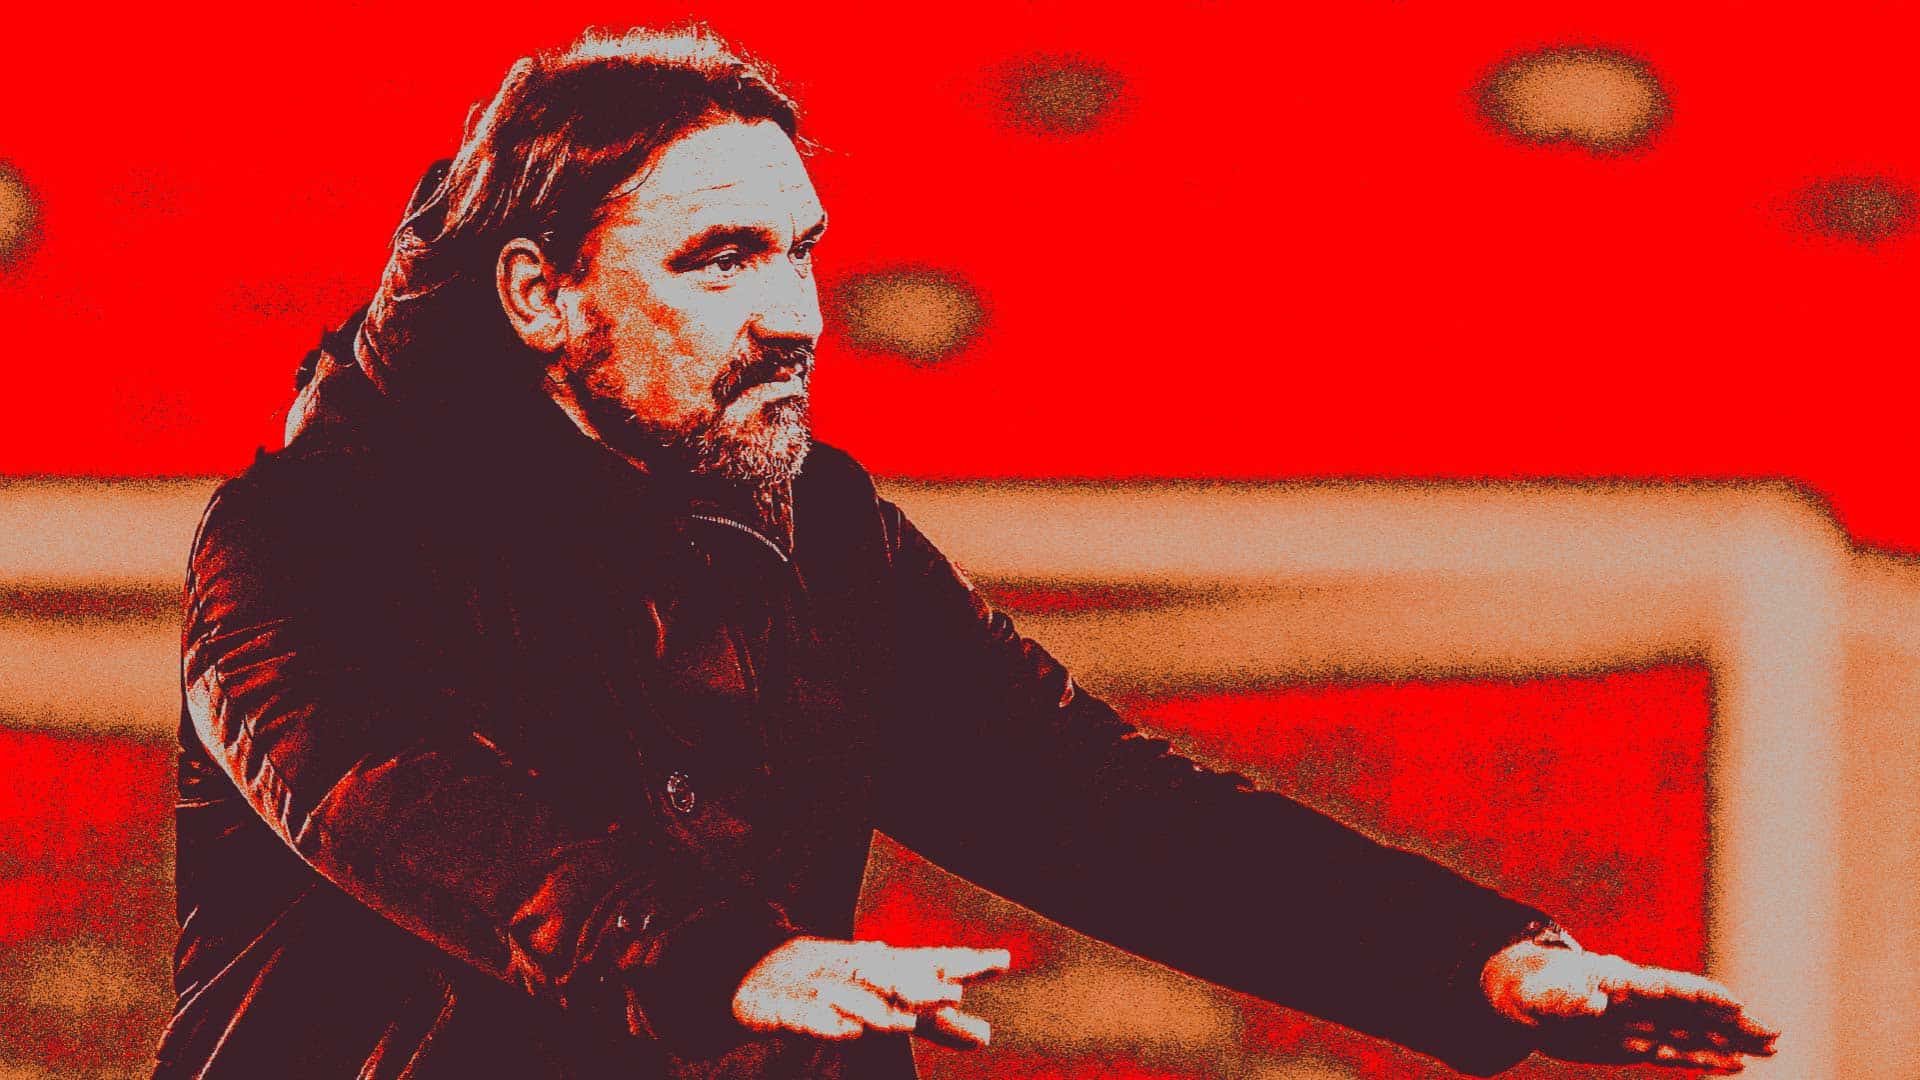 Daniel Farke preparing to salute the Leeds fans at the end of the game, but everything is red and distorted like something bad is about to happen in Twin Peaks